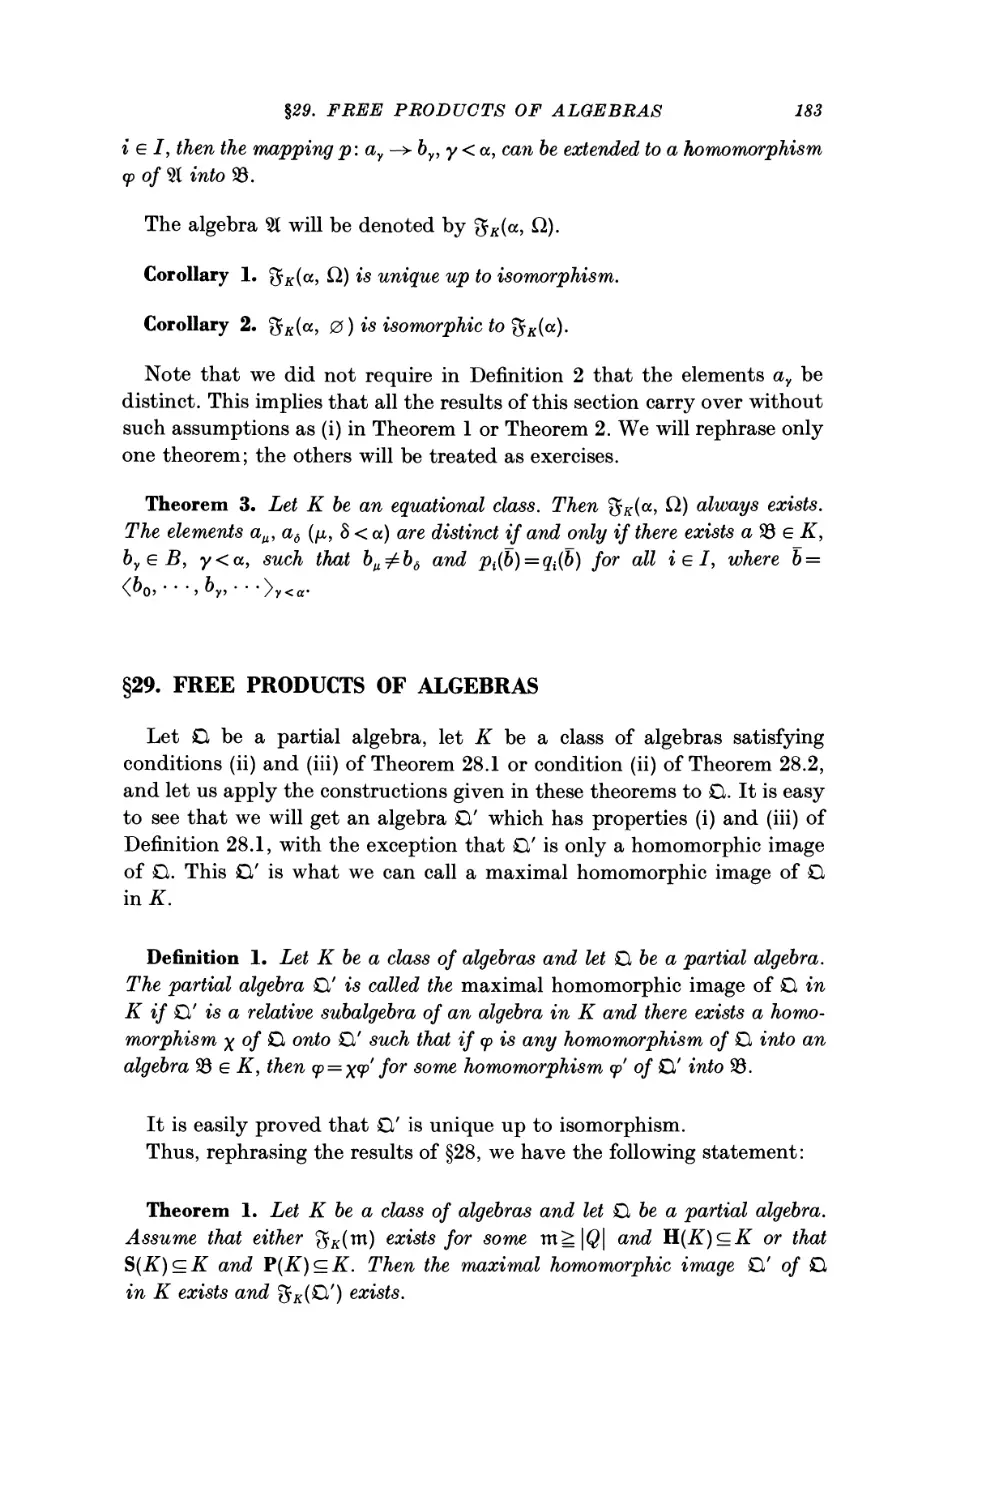 §29. Free Products of Algebras